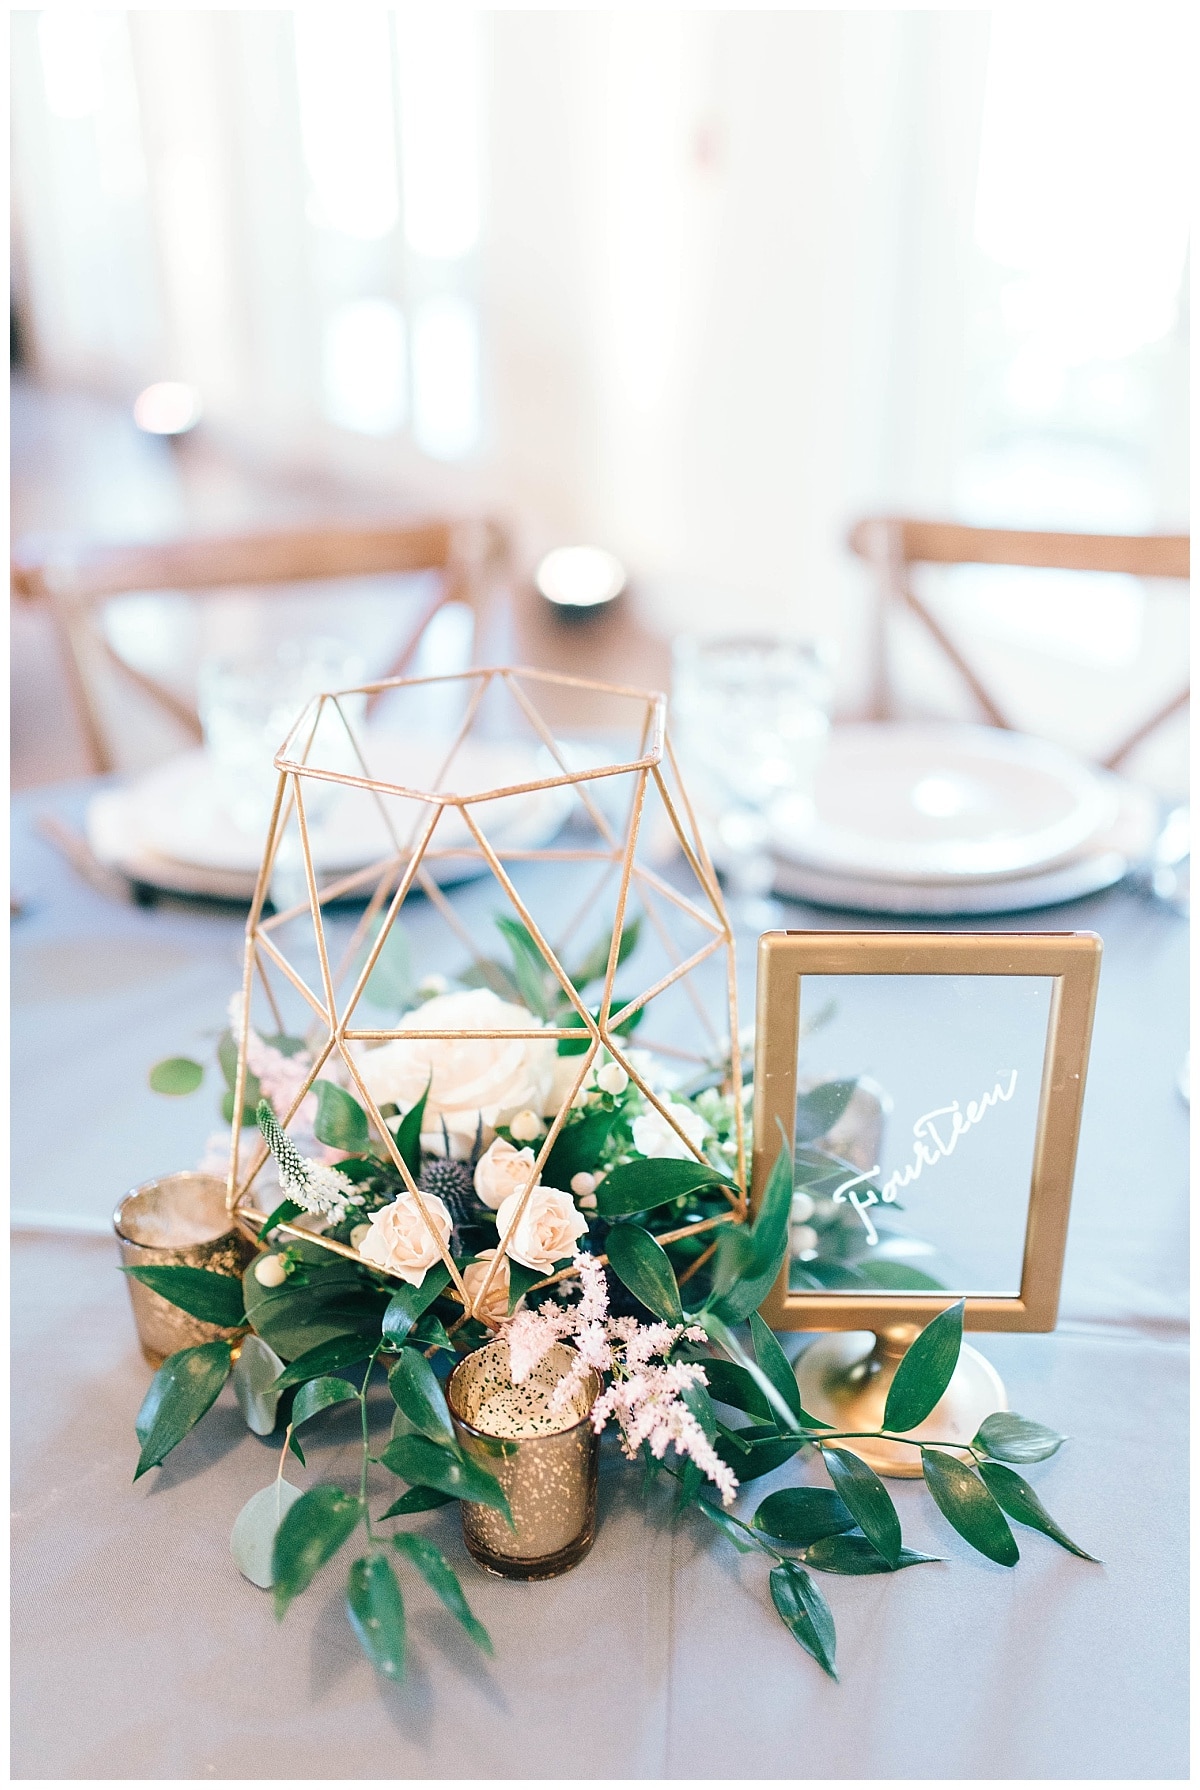 The boathouse reception design was rustic and charming with touches of gold